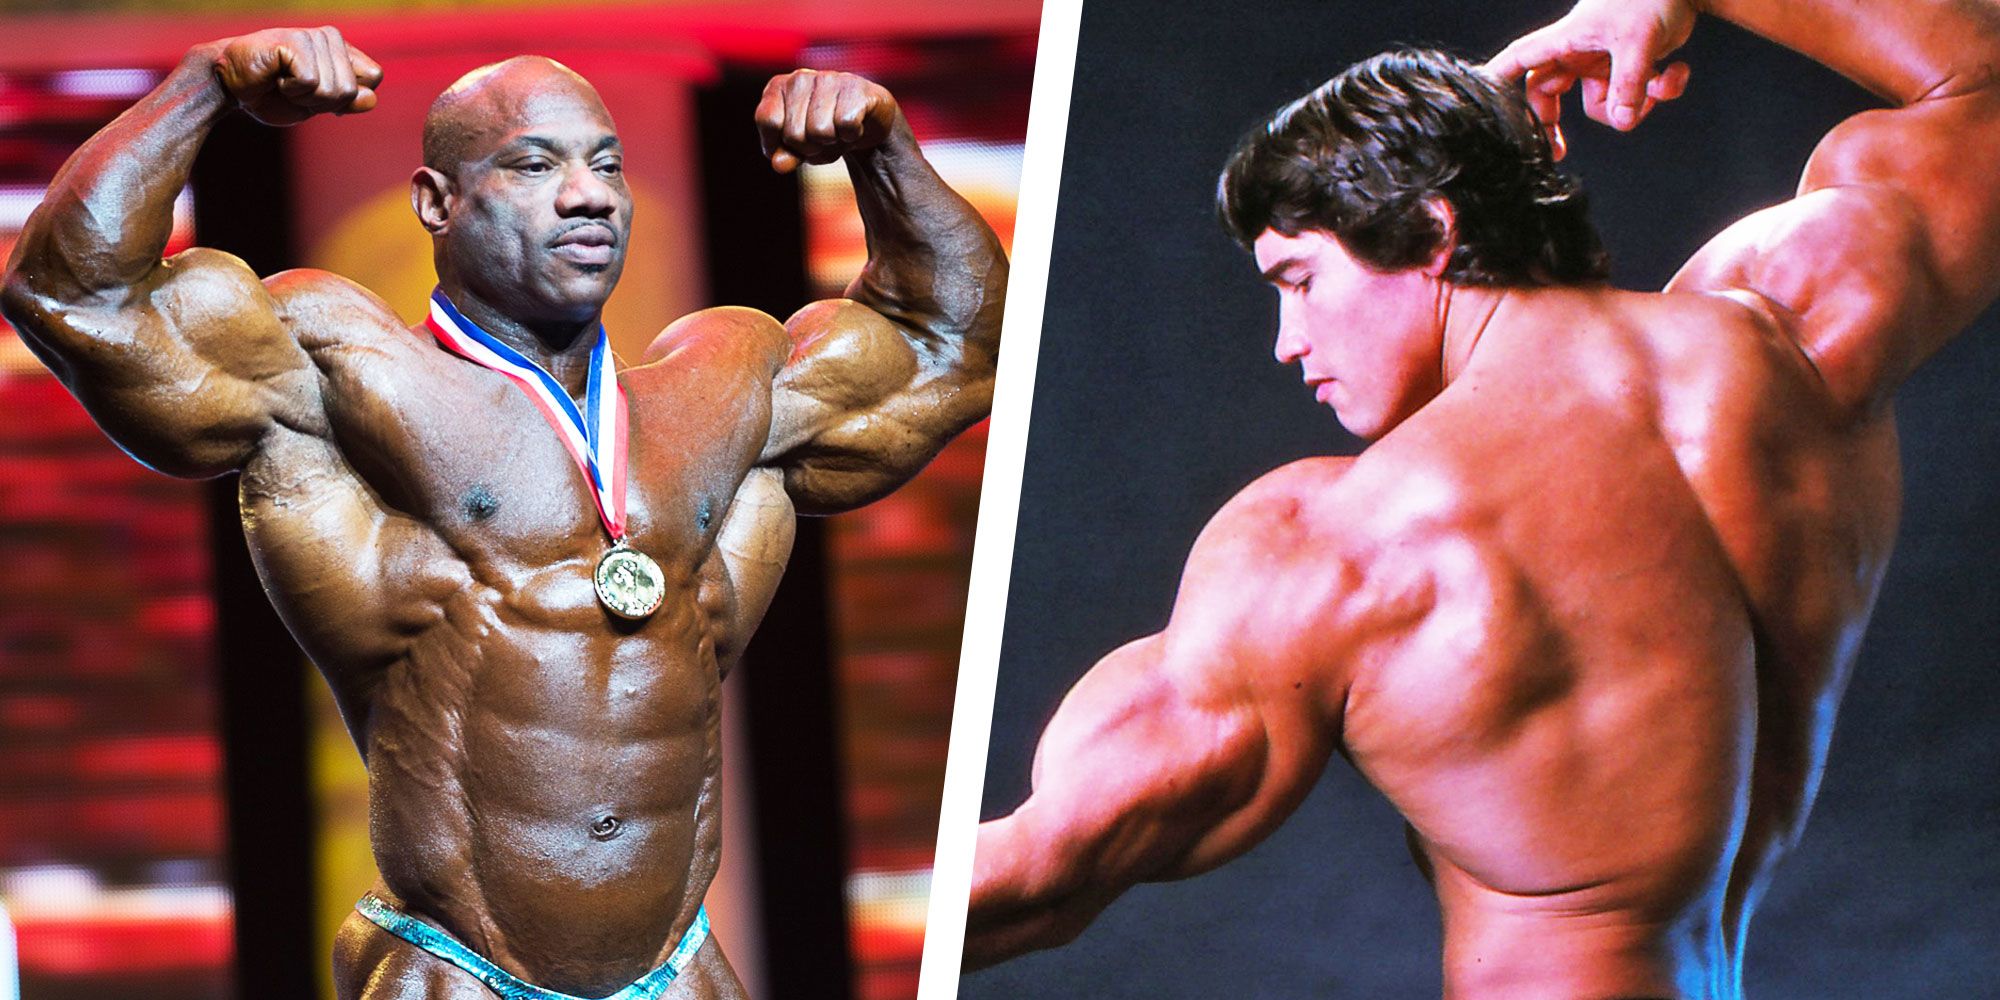 Here Is Every Winner of the Mr. Olympia Competition Since 1965